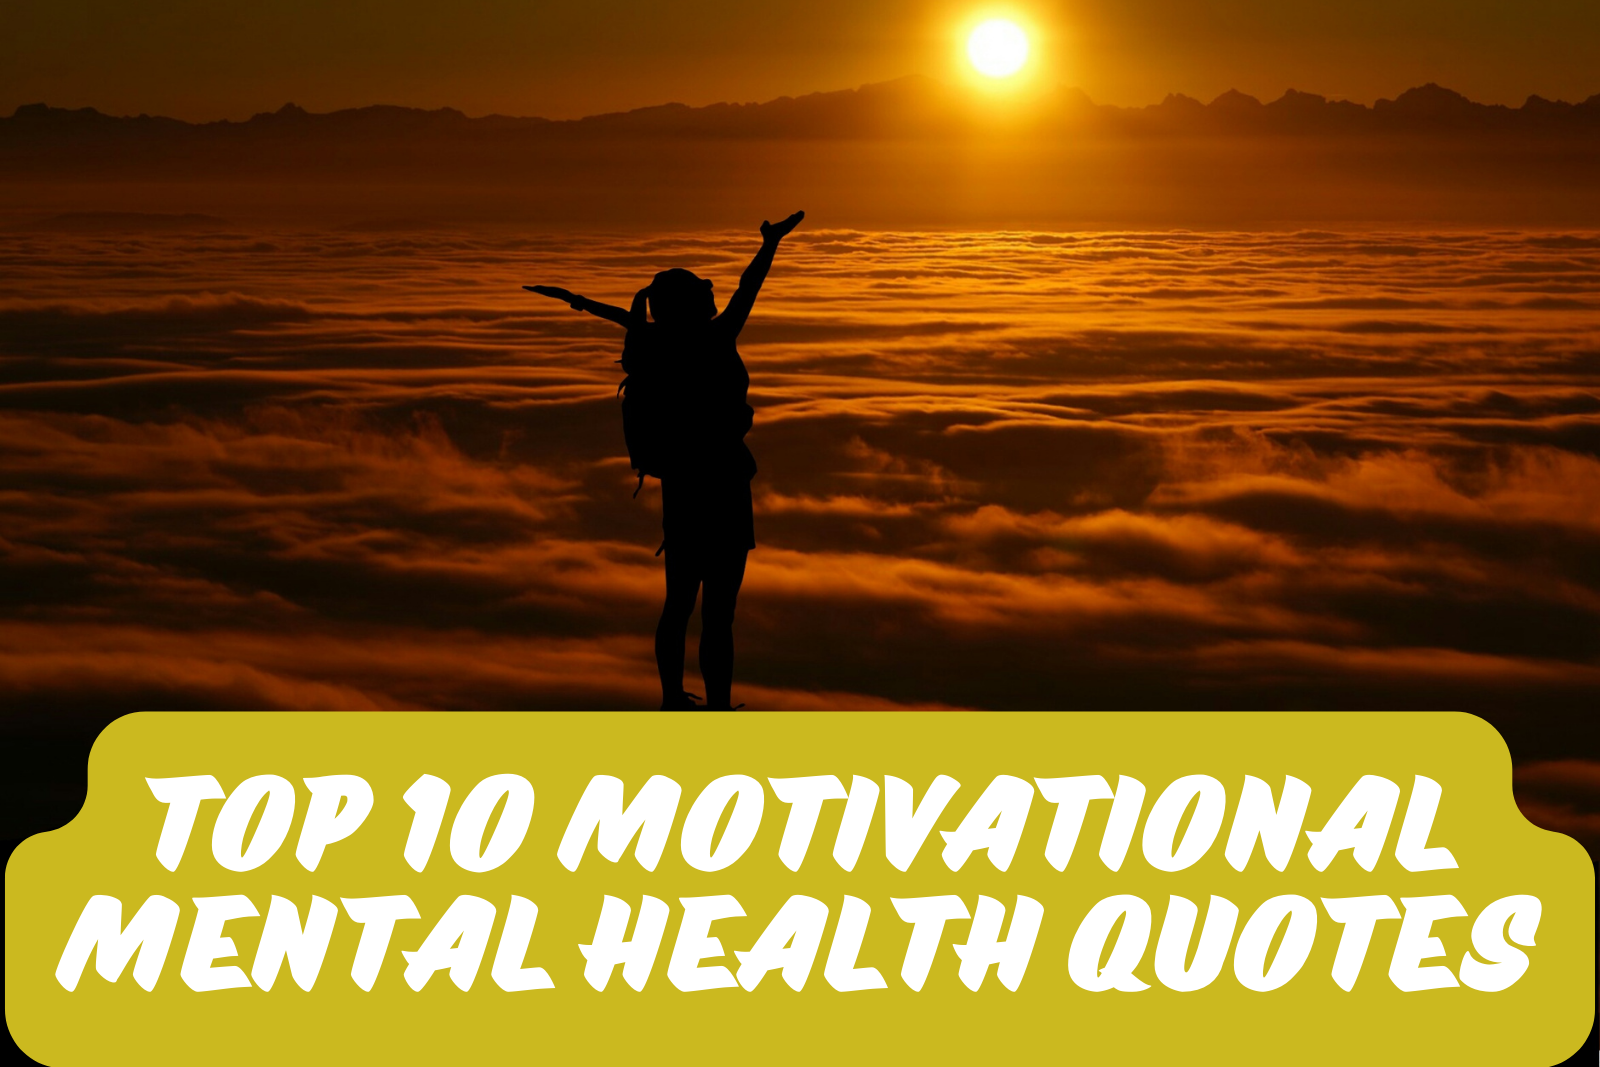 Top 10 Motivational Mental Health Quotes